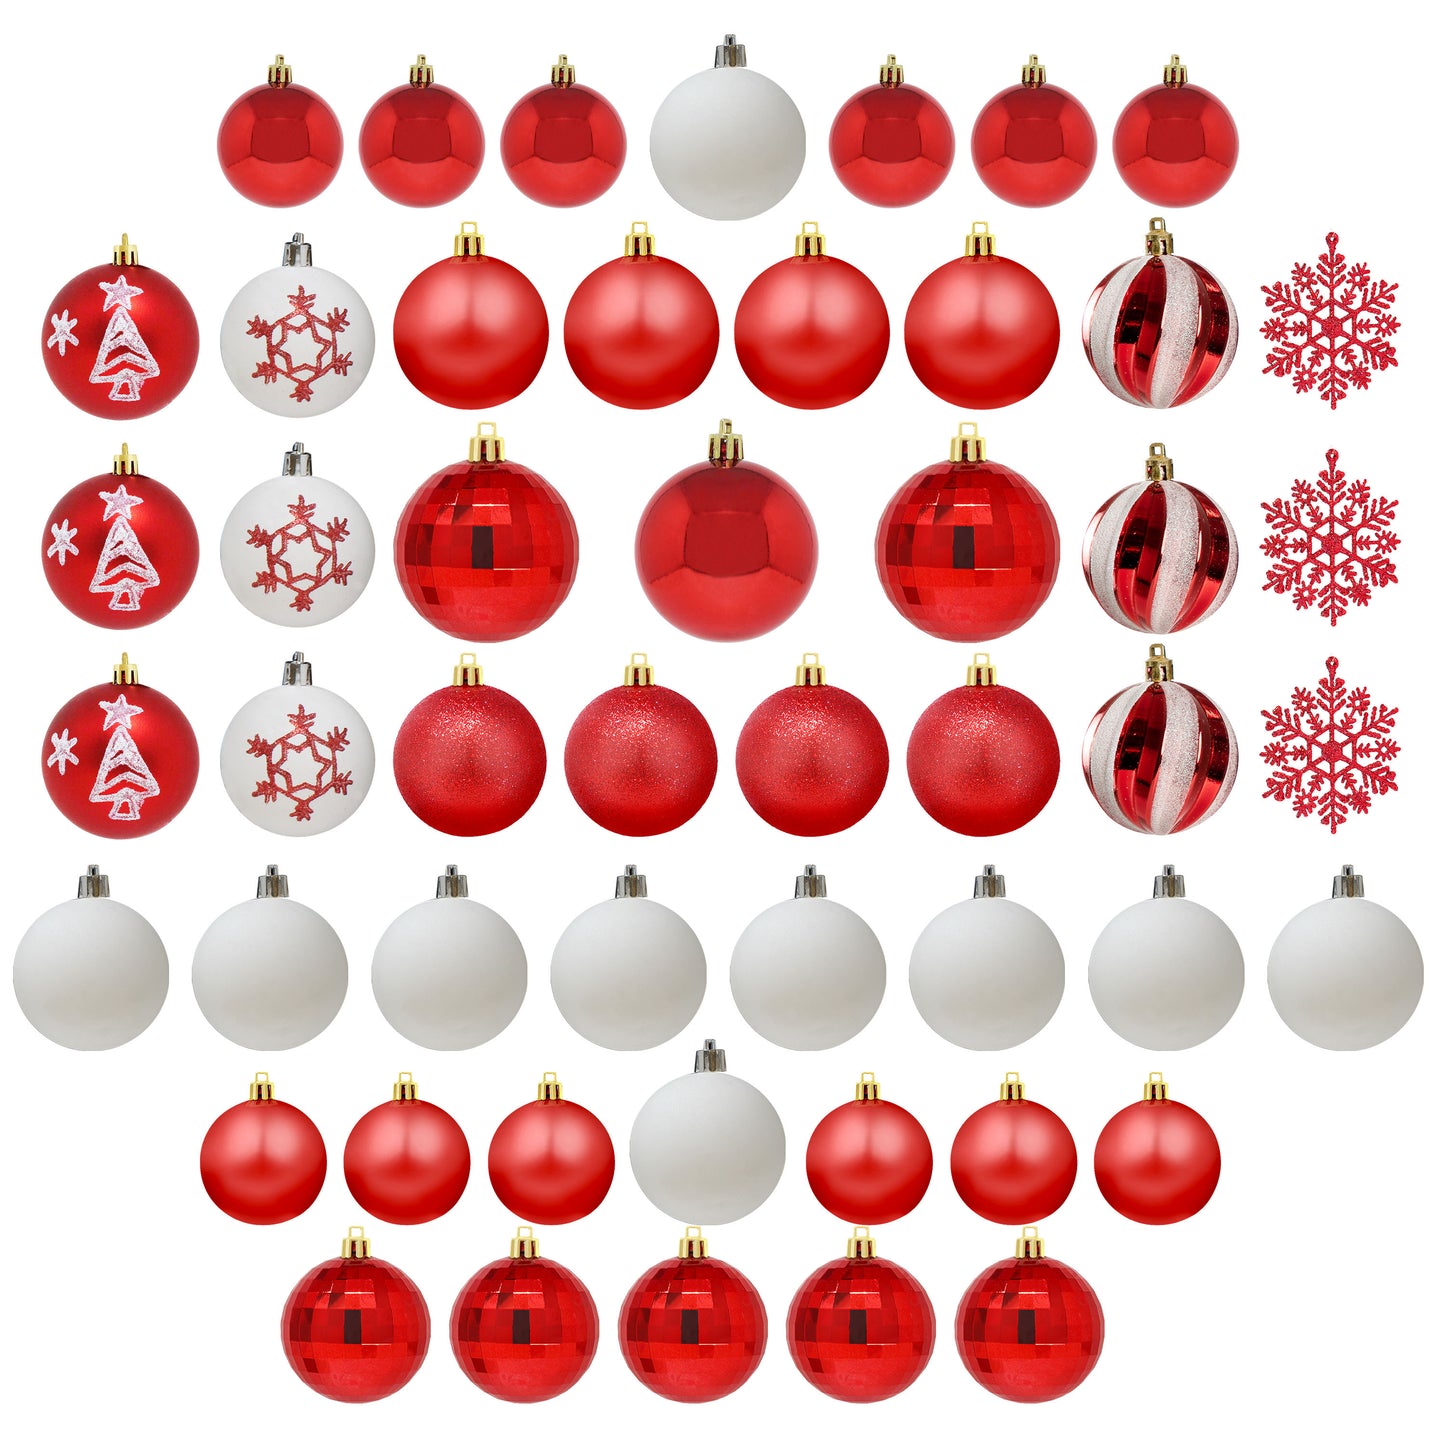 50 Pcs Christmas Ornaments, Red and White